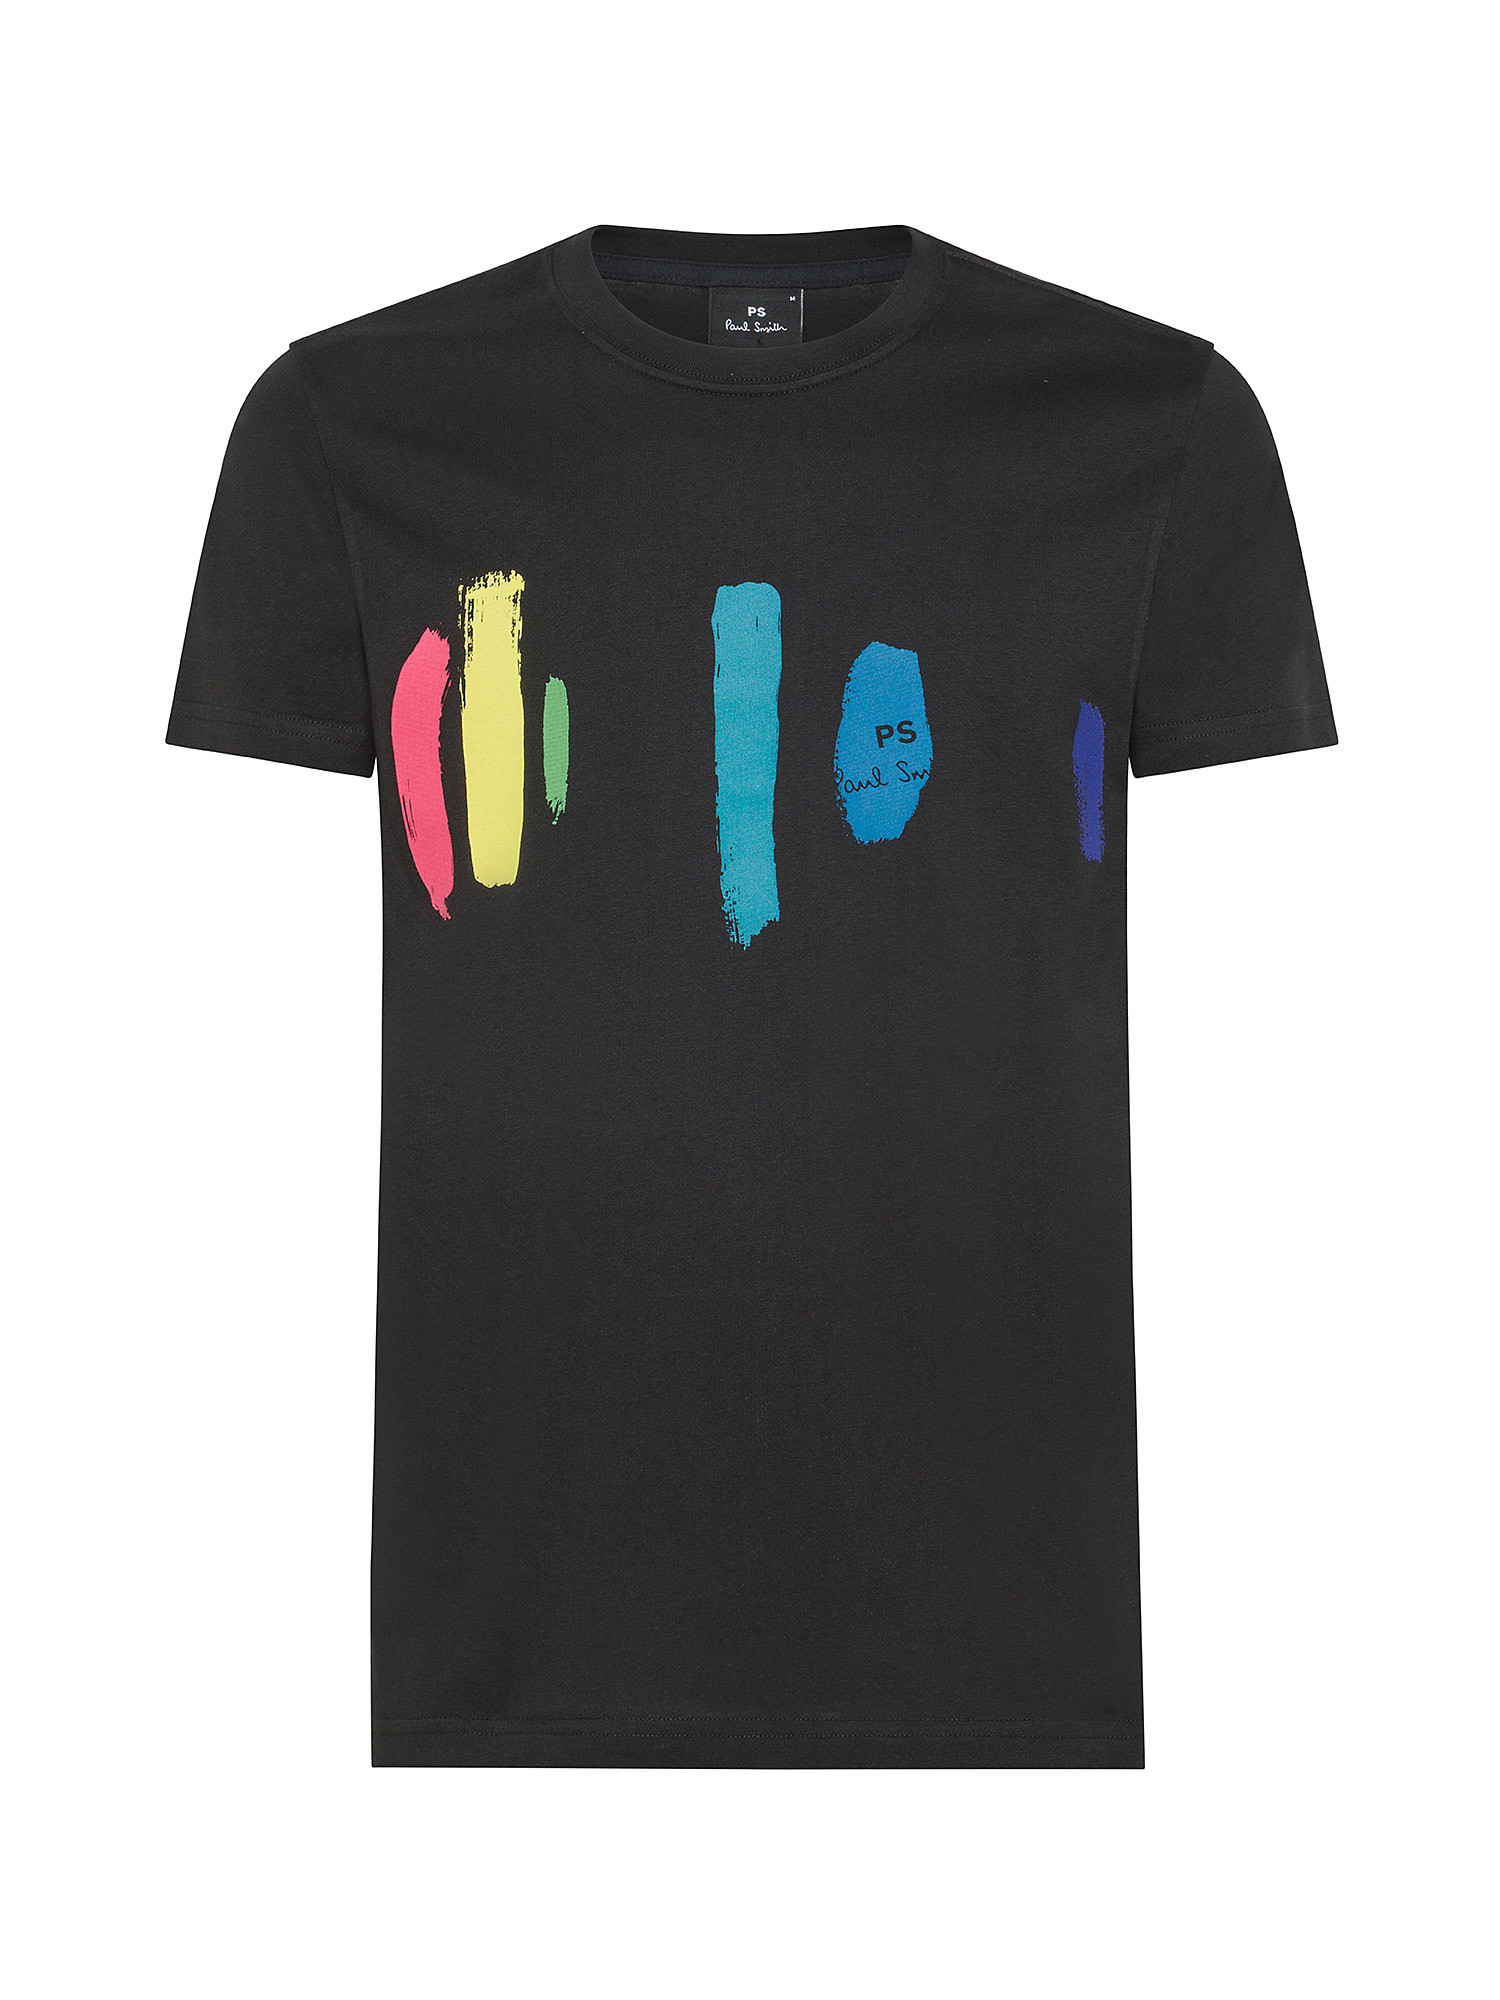 Paul Smith - Slim fit cotton T-shirt with brush strokes print, Black, large image number 0